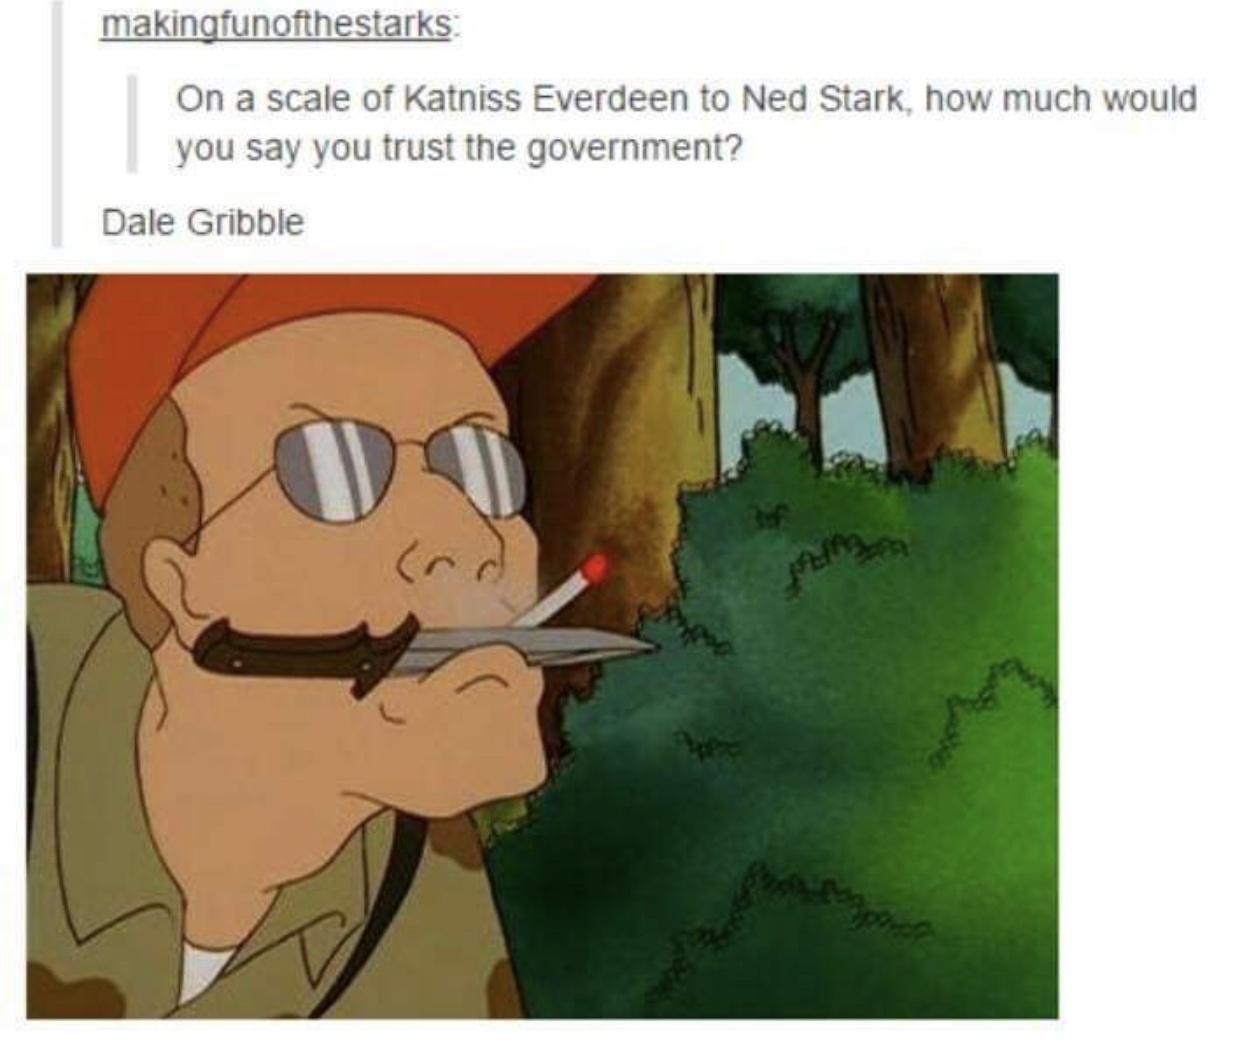 dale gribble memes - makingfunofthestarks On a scale of Katniss Everdeen to Ned Stark, how much would you say you trust the government? Dale Gribble